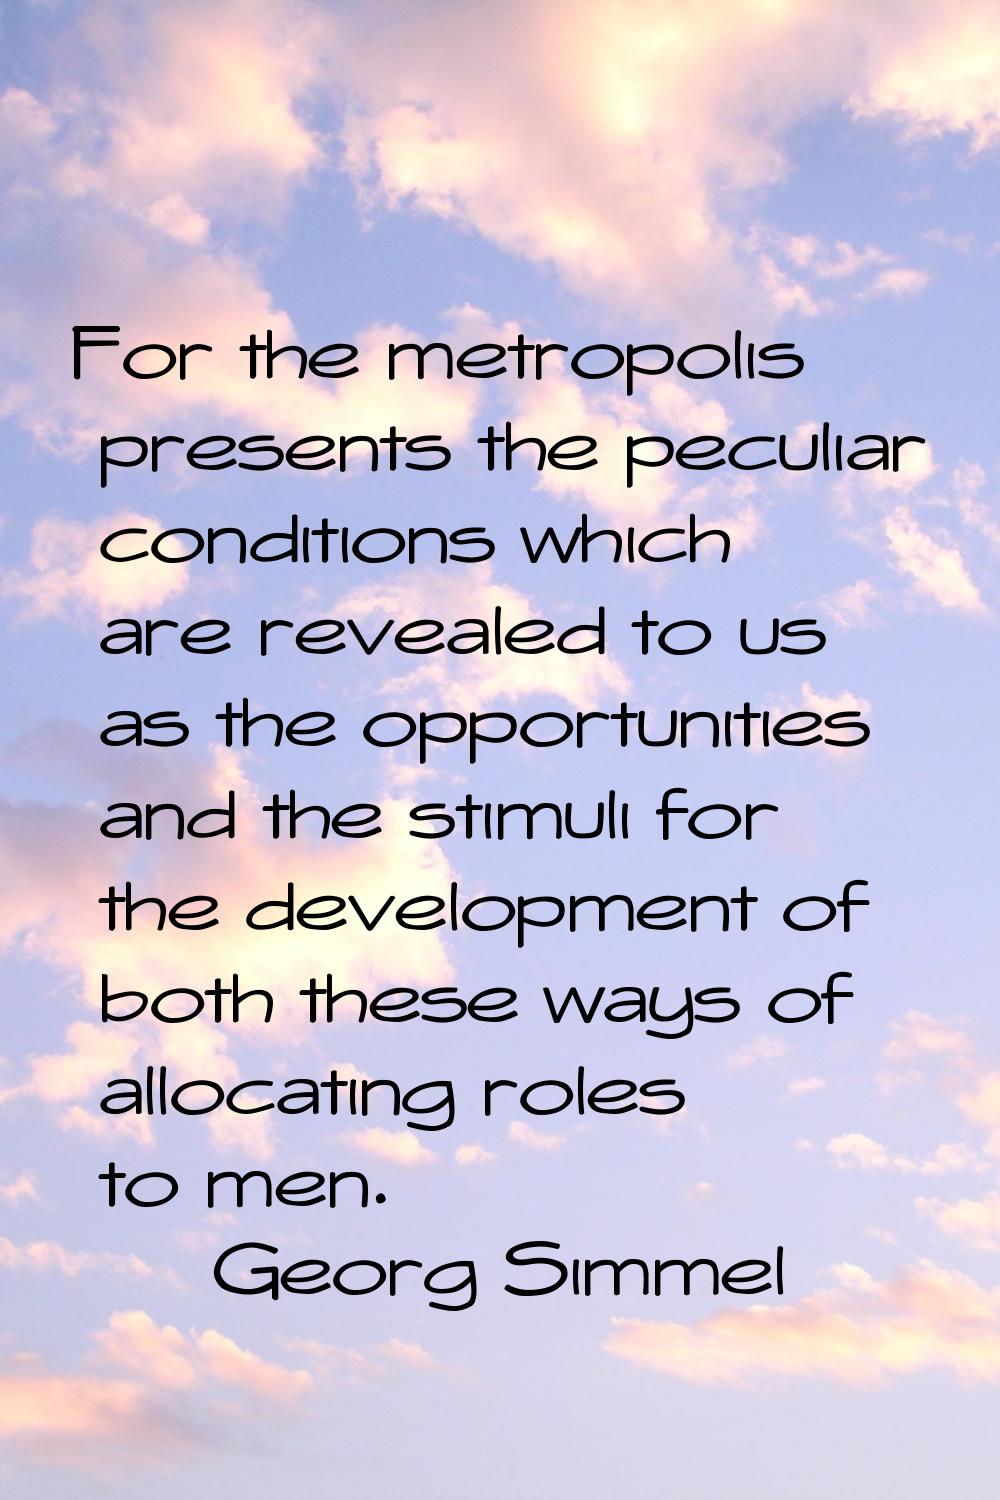 For the metropolis presents the peculiar conditions which are revealed to us as the opportunities a